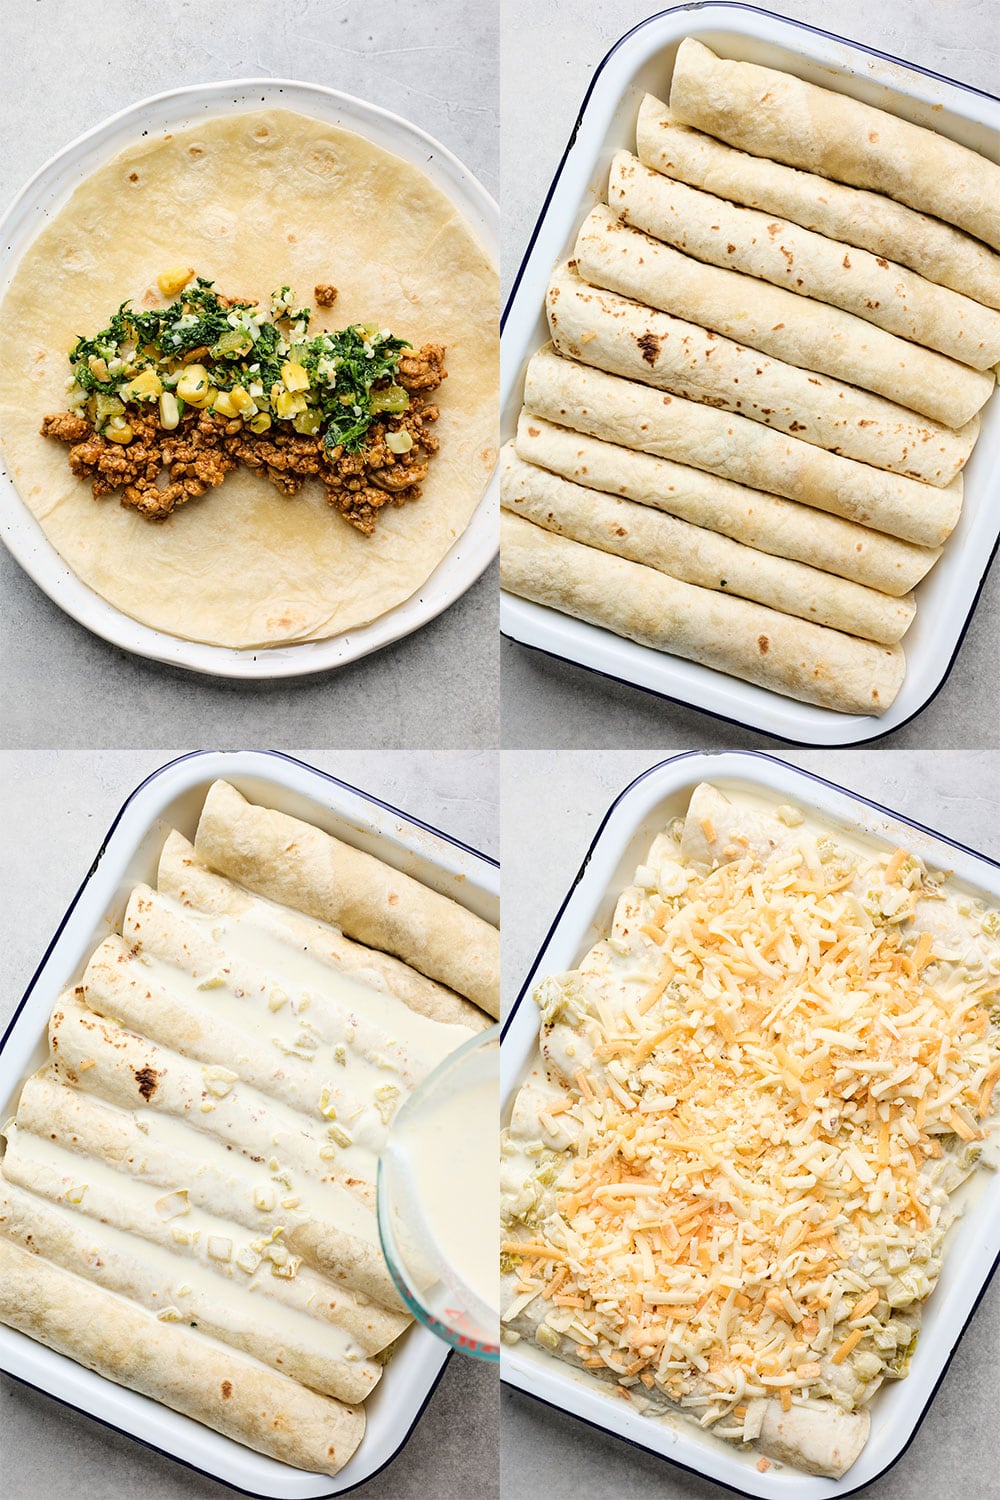 Green Chile Chicken Enchiladas step by step instructions